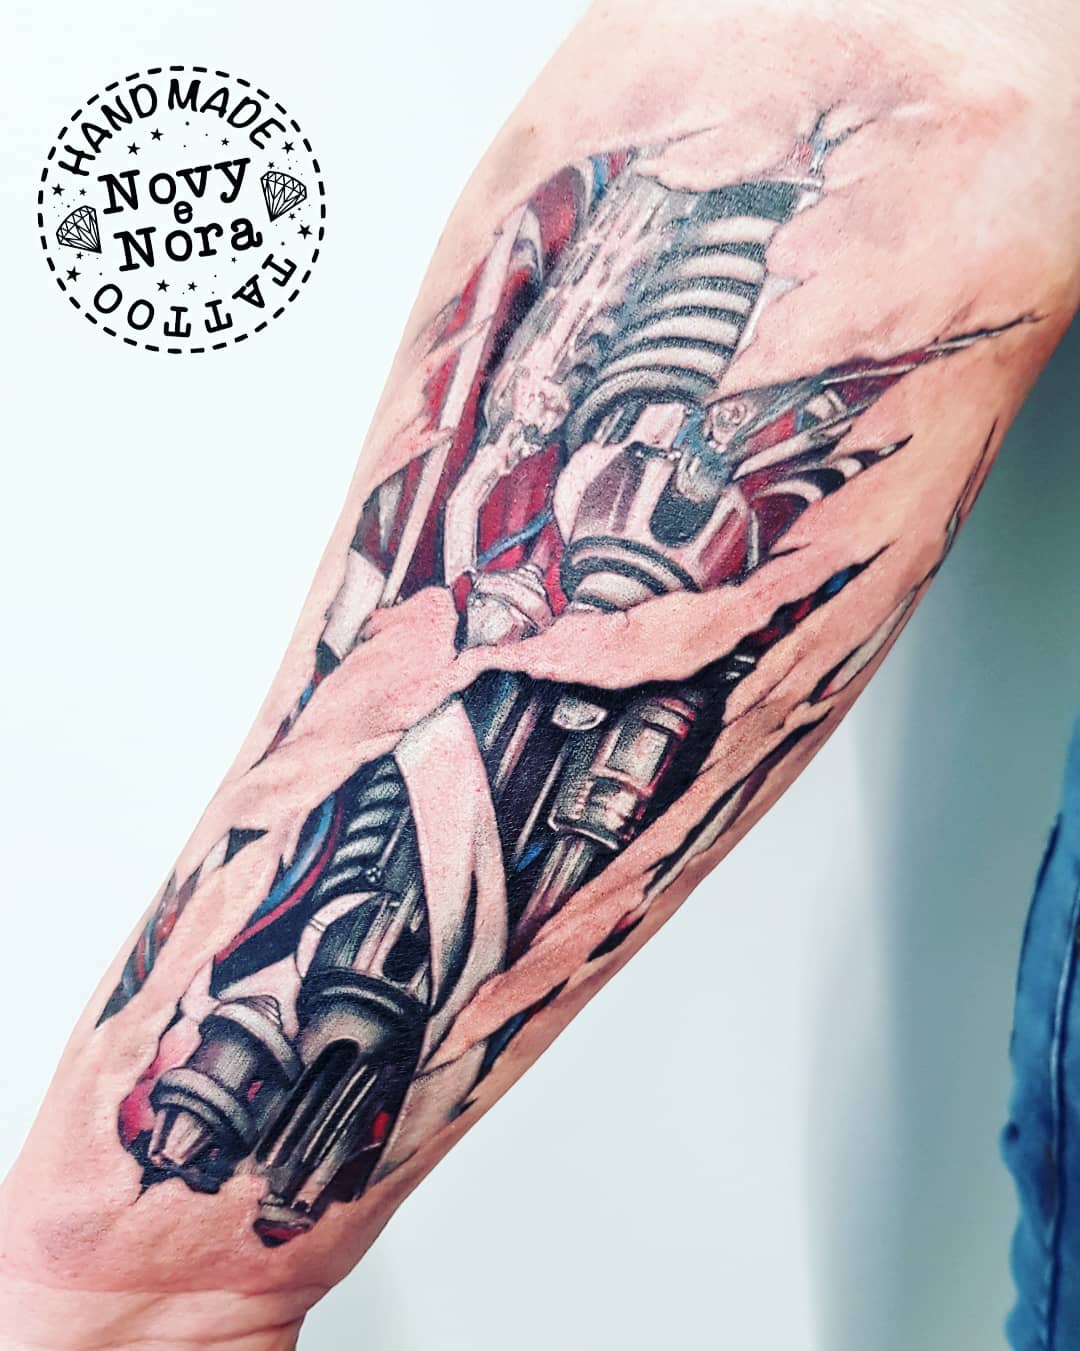 Pistons and wires going down top of arm looking as if mechanical parts are  underneath the skin in the style of terminator or iron man tattoo idea   TattoosAI